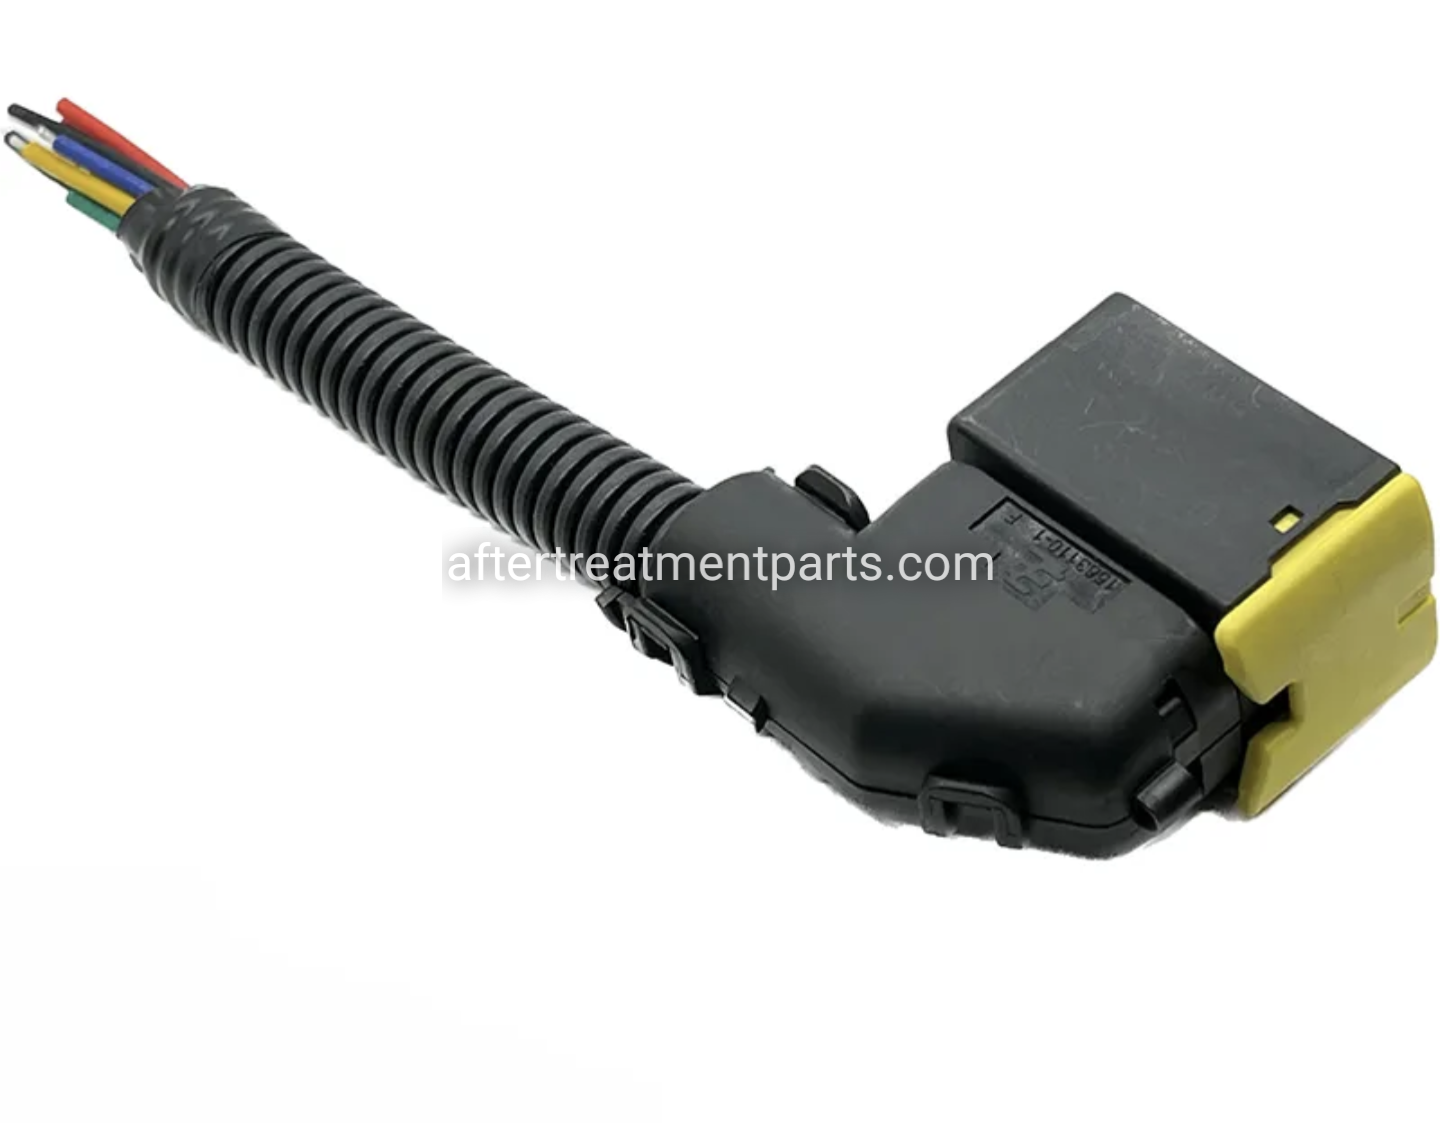 4919354 | DEF Pump 12 Pin Harness Pigtail | For Cummins® Engines